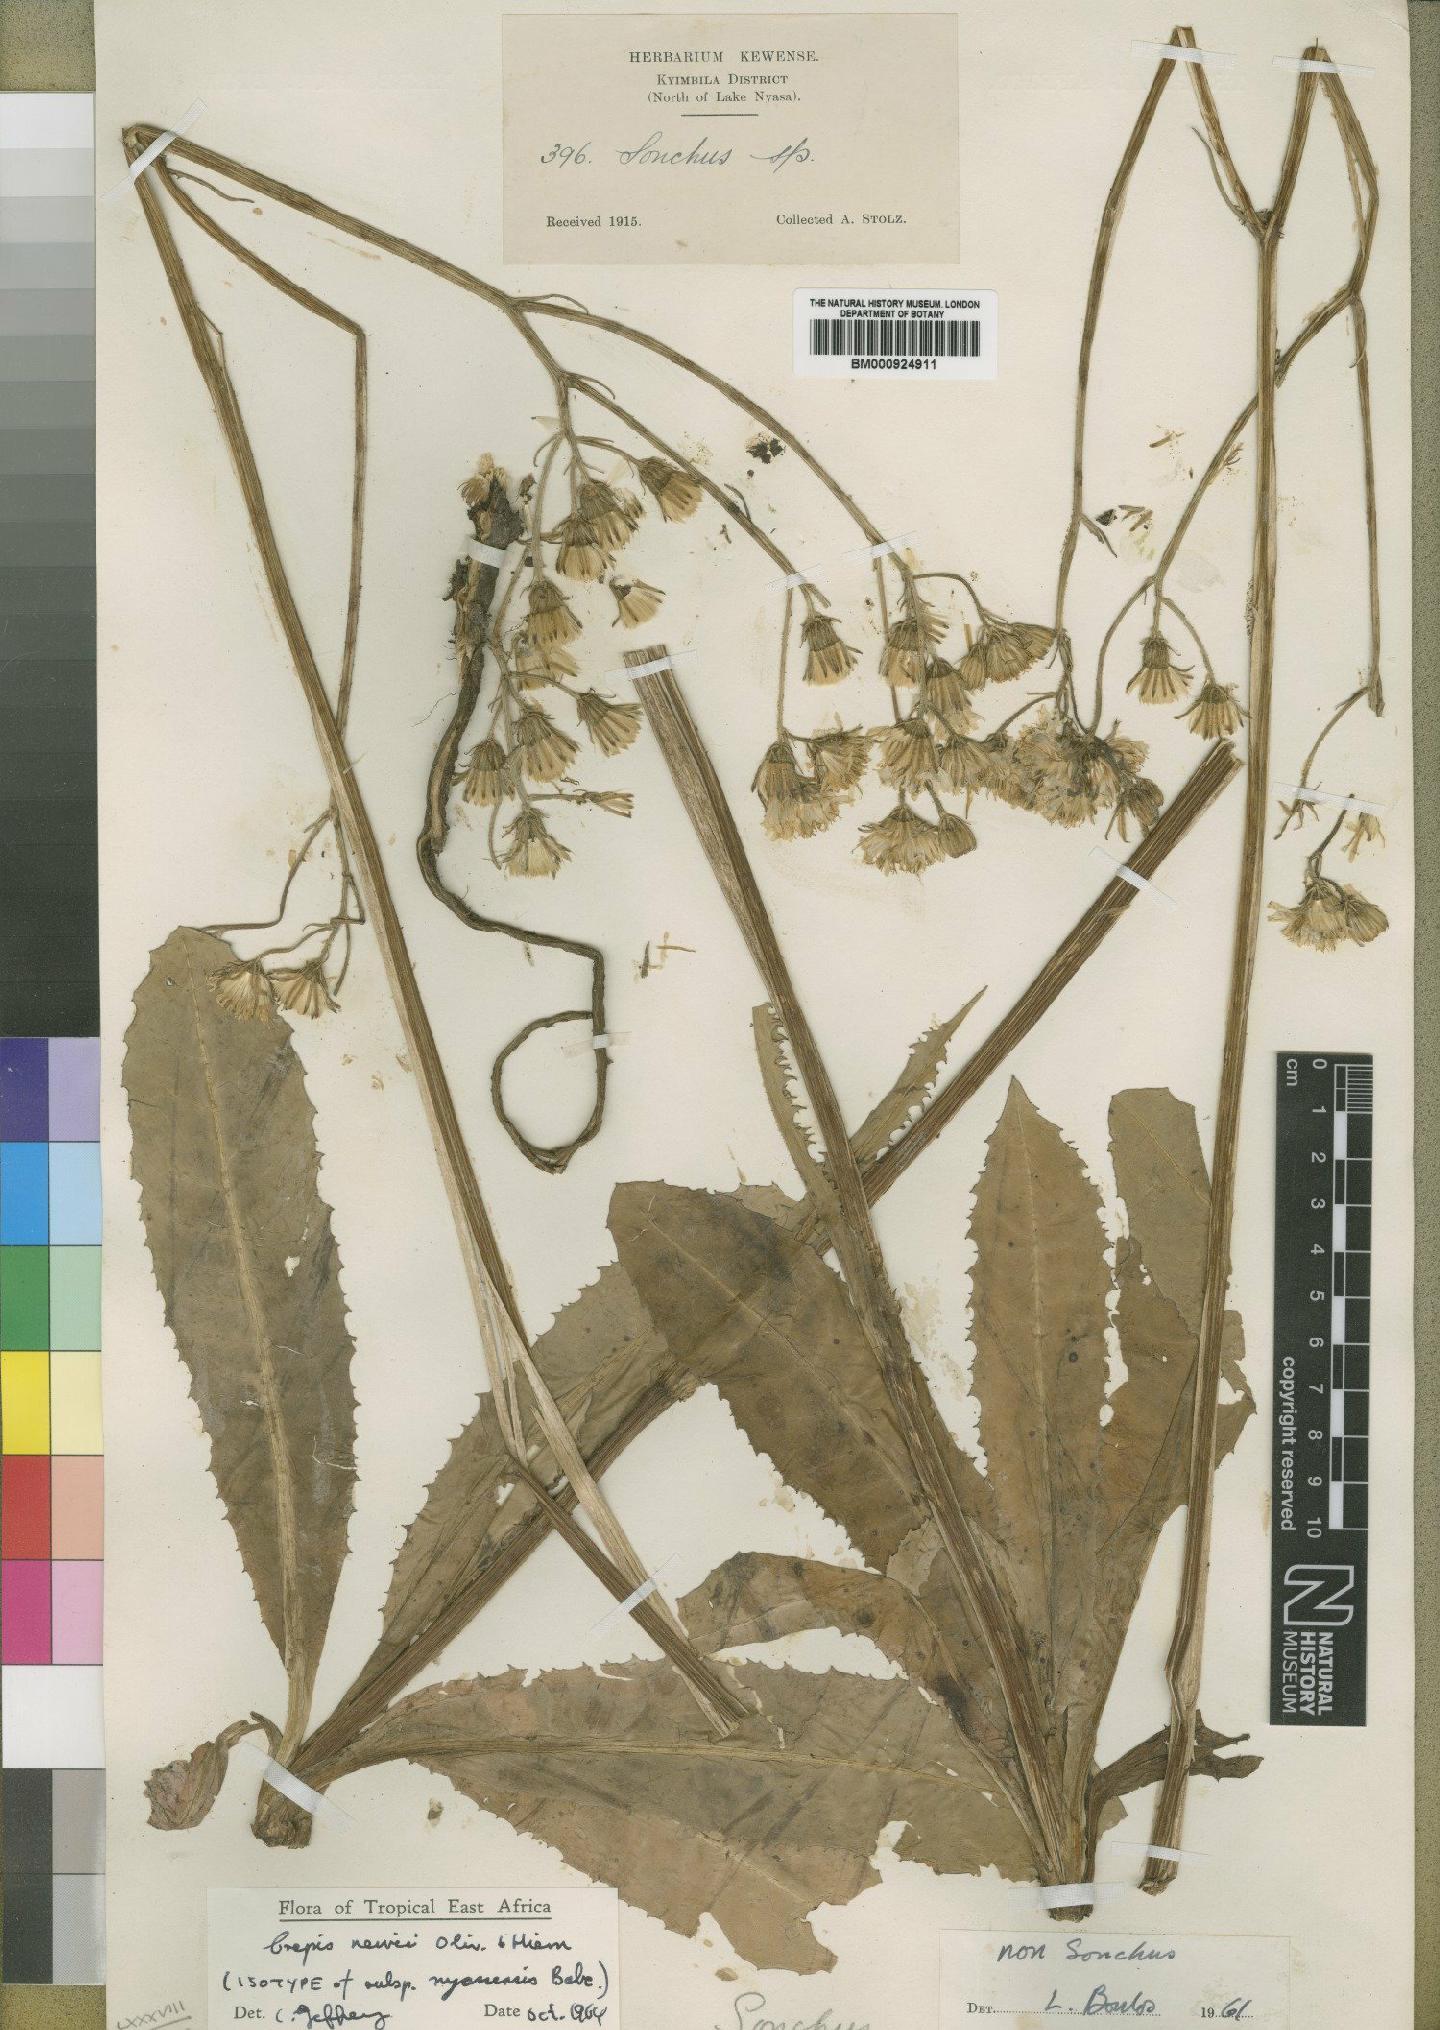 To NHMUK collection (Crepis newii Oliv. & Hiern; Isotype; NHMUK:ecatalogue:4553783)